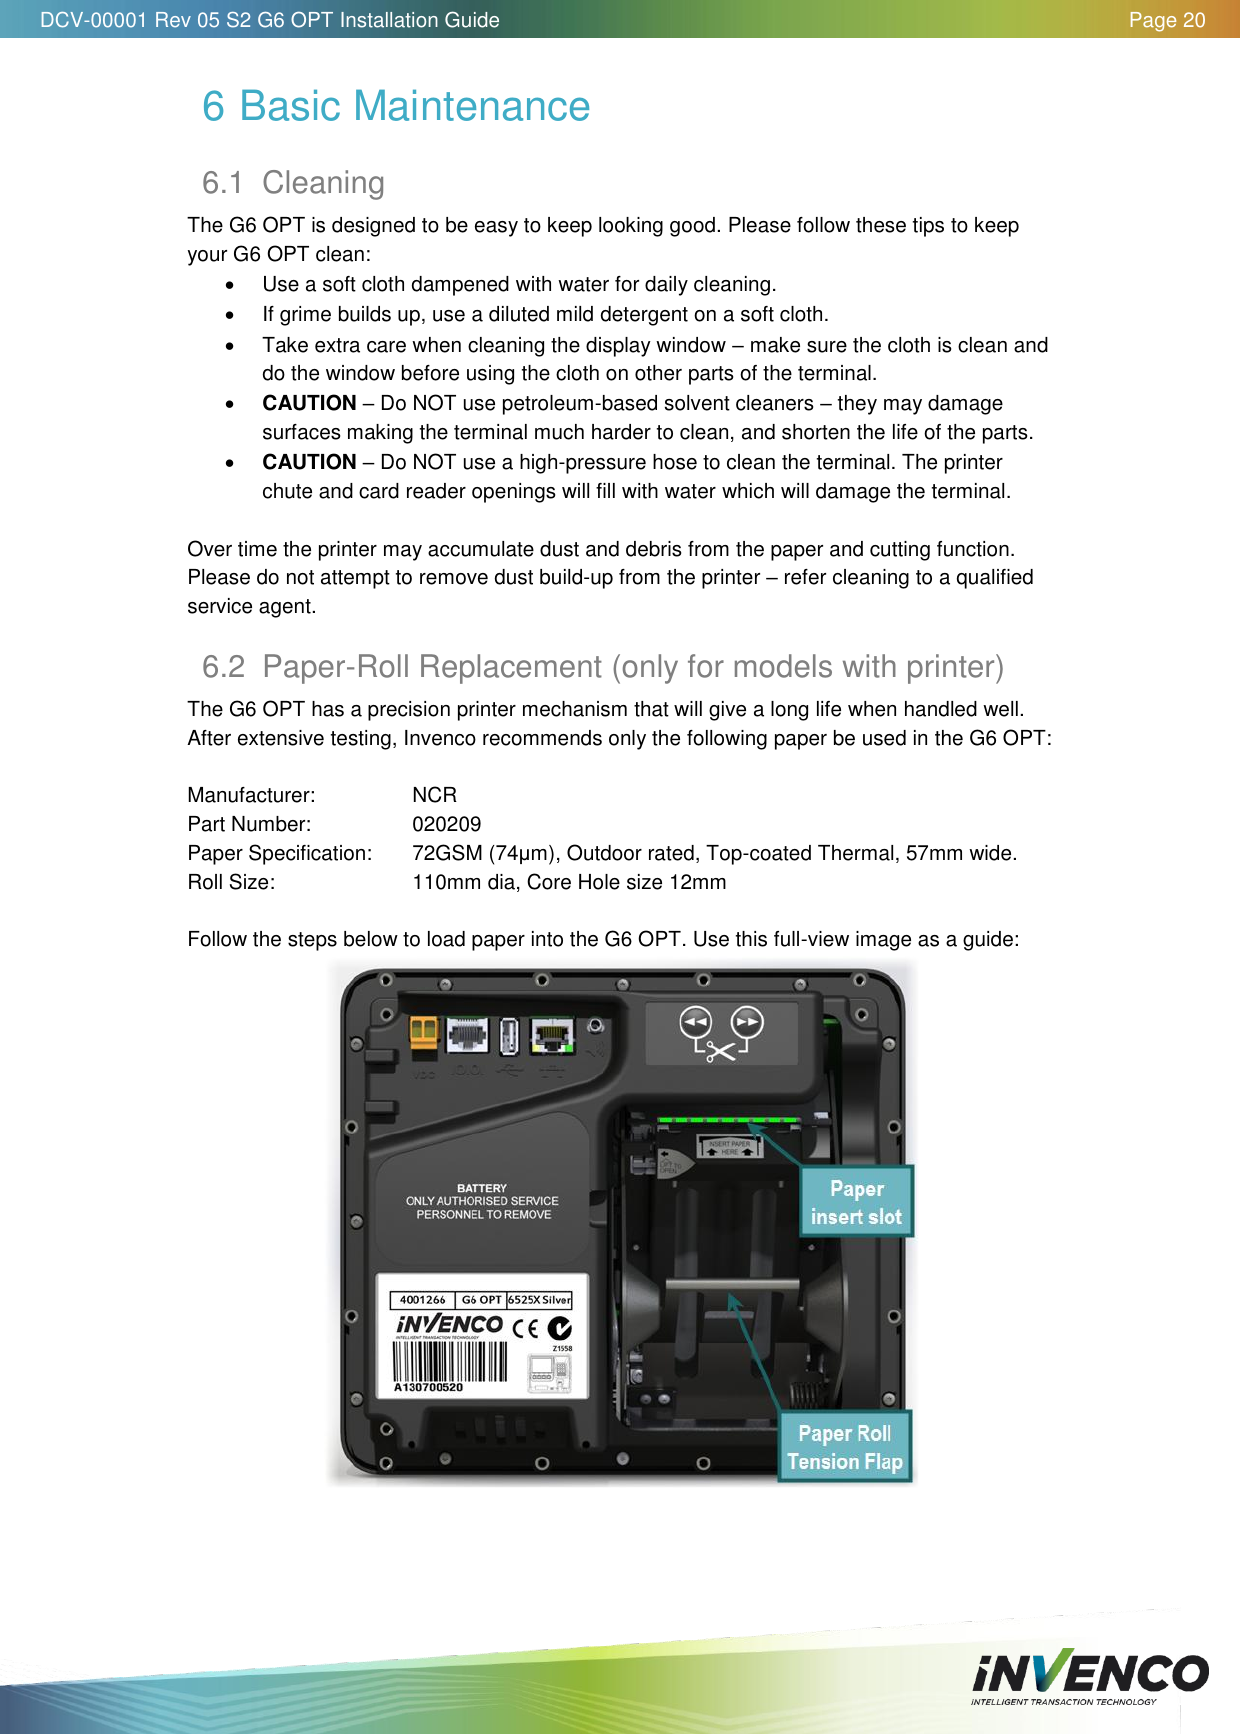   DCV-00001 Rev 05 S2 G6 OPT Installation Guide    Page 20  6 Basic Maintenance 6.1  Cleaning The G6 OPT is designed to be easy to keep looking good. Please follow these tips to keep your G6 OPT clean:   Use a soft cloth dampened with water for daily cleaning.   If grime builds up, use a diluted mild detergent on a soft cloth.   Take extra care when cleaning the display window – make sure the cloth is clean and do the window before using the cloth on other parts of the terminal.  CAUTION – Do NOT use petroleum-based solvent cleaners – they may damage surfaces making the terminal much harder to clean, and shorten the life of the parts.  CAUTION – Do NOT use a high-pressure hose to clean the terminal. The printer chute and card reader openings will fill with water which will damage the terminal.  Over time the printer may accumulate dust and debris from the paper and cutting function. Please do not attempt to remove dust build-up from the printer – refer cleaning to a qualified service agent. 6.2  Paper-Roll Replacement (only for models with printer) The G6 OPT has a precision printer mechanism that will give a long life when handled well. After extensive testing, Invenco recommends only the following paper be used in the G6 OPT:  Manufacturer:    NCR Part Number:    020209 Paper Specification:   72GSM (74μm), Outdoor rated, Top-coated Thermal, 57mm wide. Roll Size:    110mm dia, Core Hole size 12mm  Follow the steps below to load paper into the G6 OPT. Use this full-view image as a guide:     